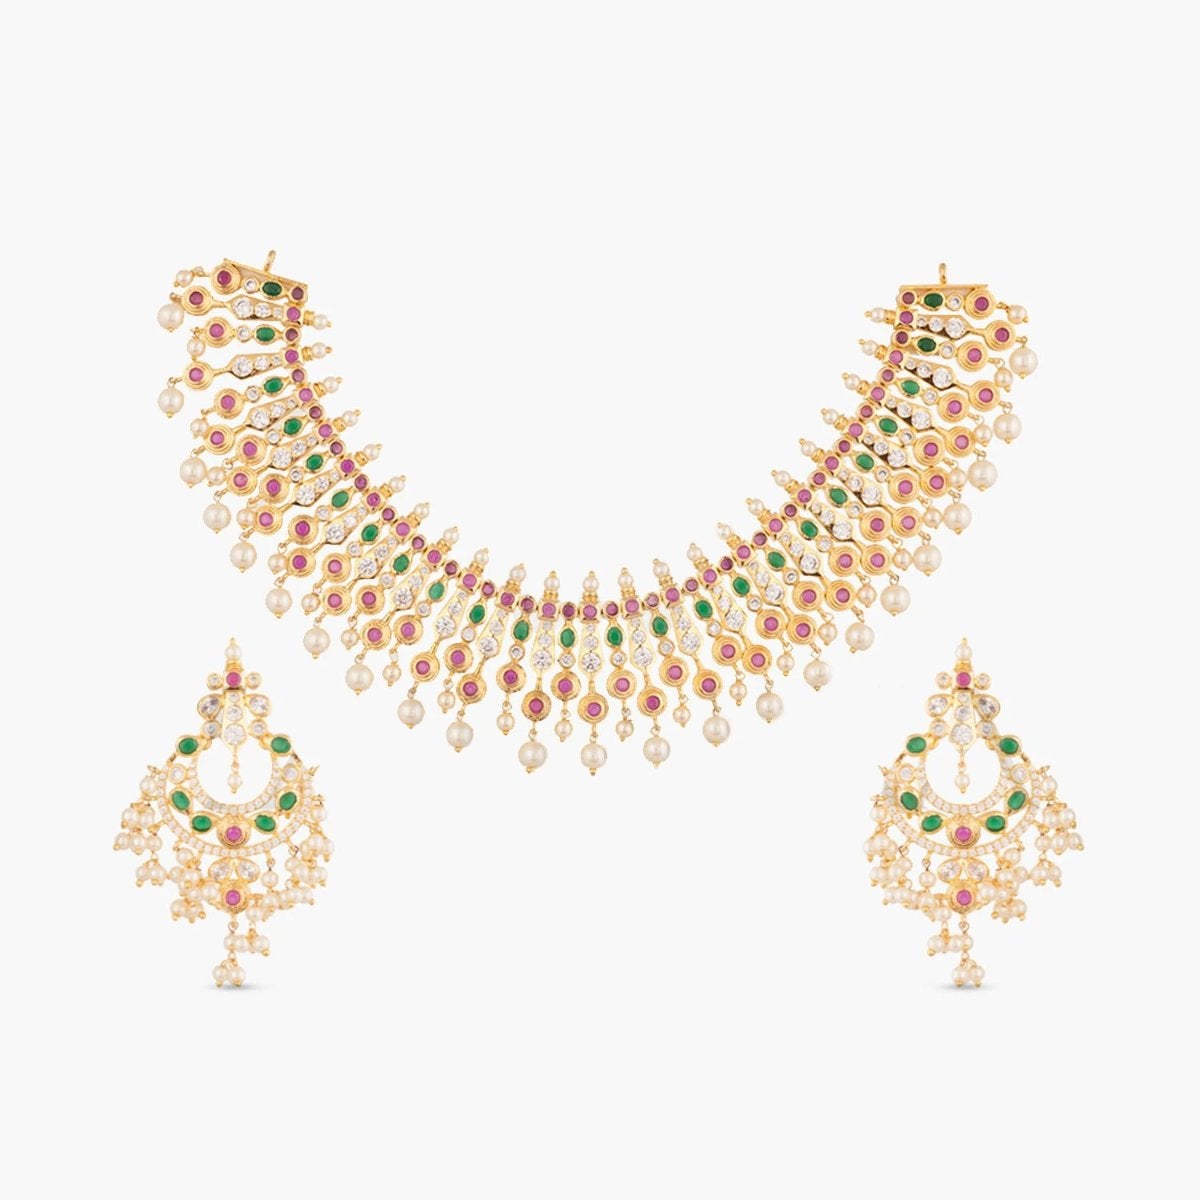 A picture of Indian artificial jewelry. It is a gold plated necklace set with earrings featuring pearls and green and red gemstones.